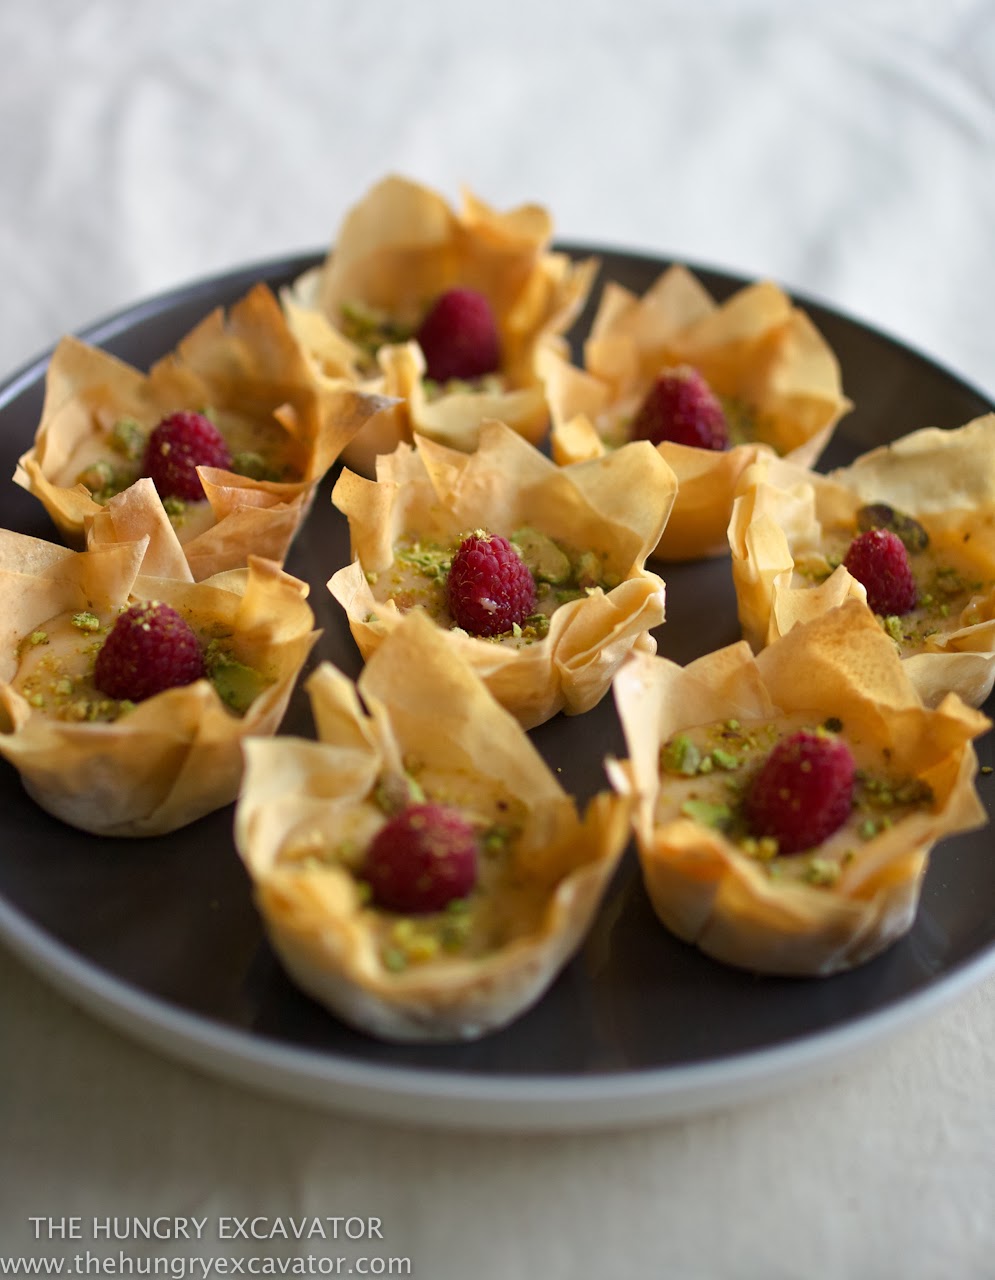 The Hungry Excavator: Rose and Raspberry Filo Tartlets